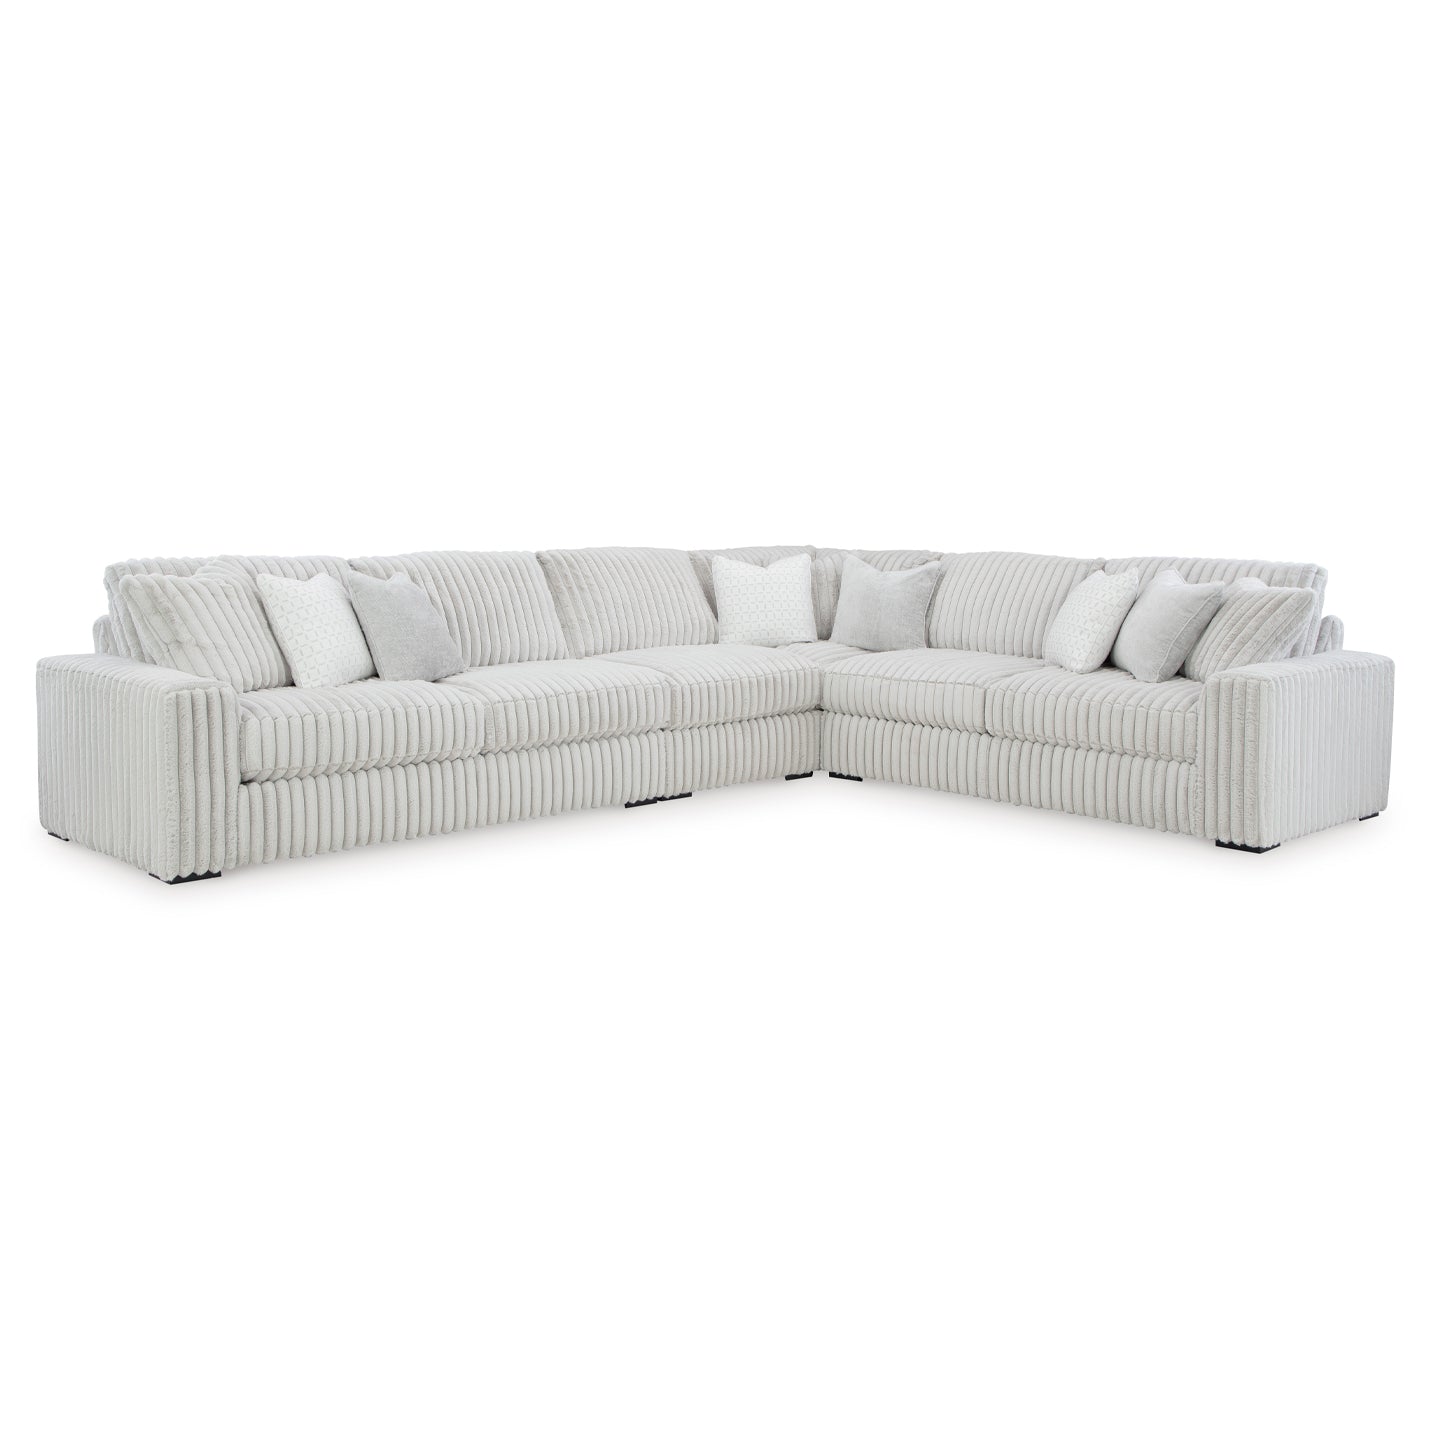 Luxury Stupendous Sectional featuring four pieces including a wedge and armless chair, perfect for spacious lounging